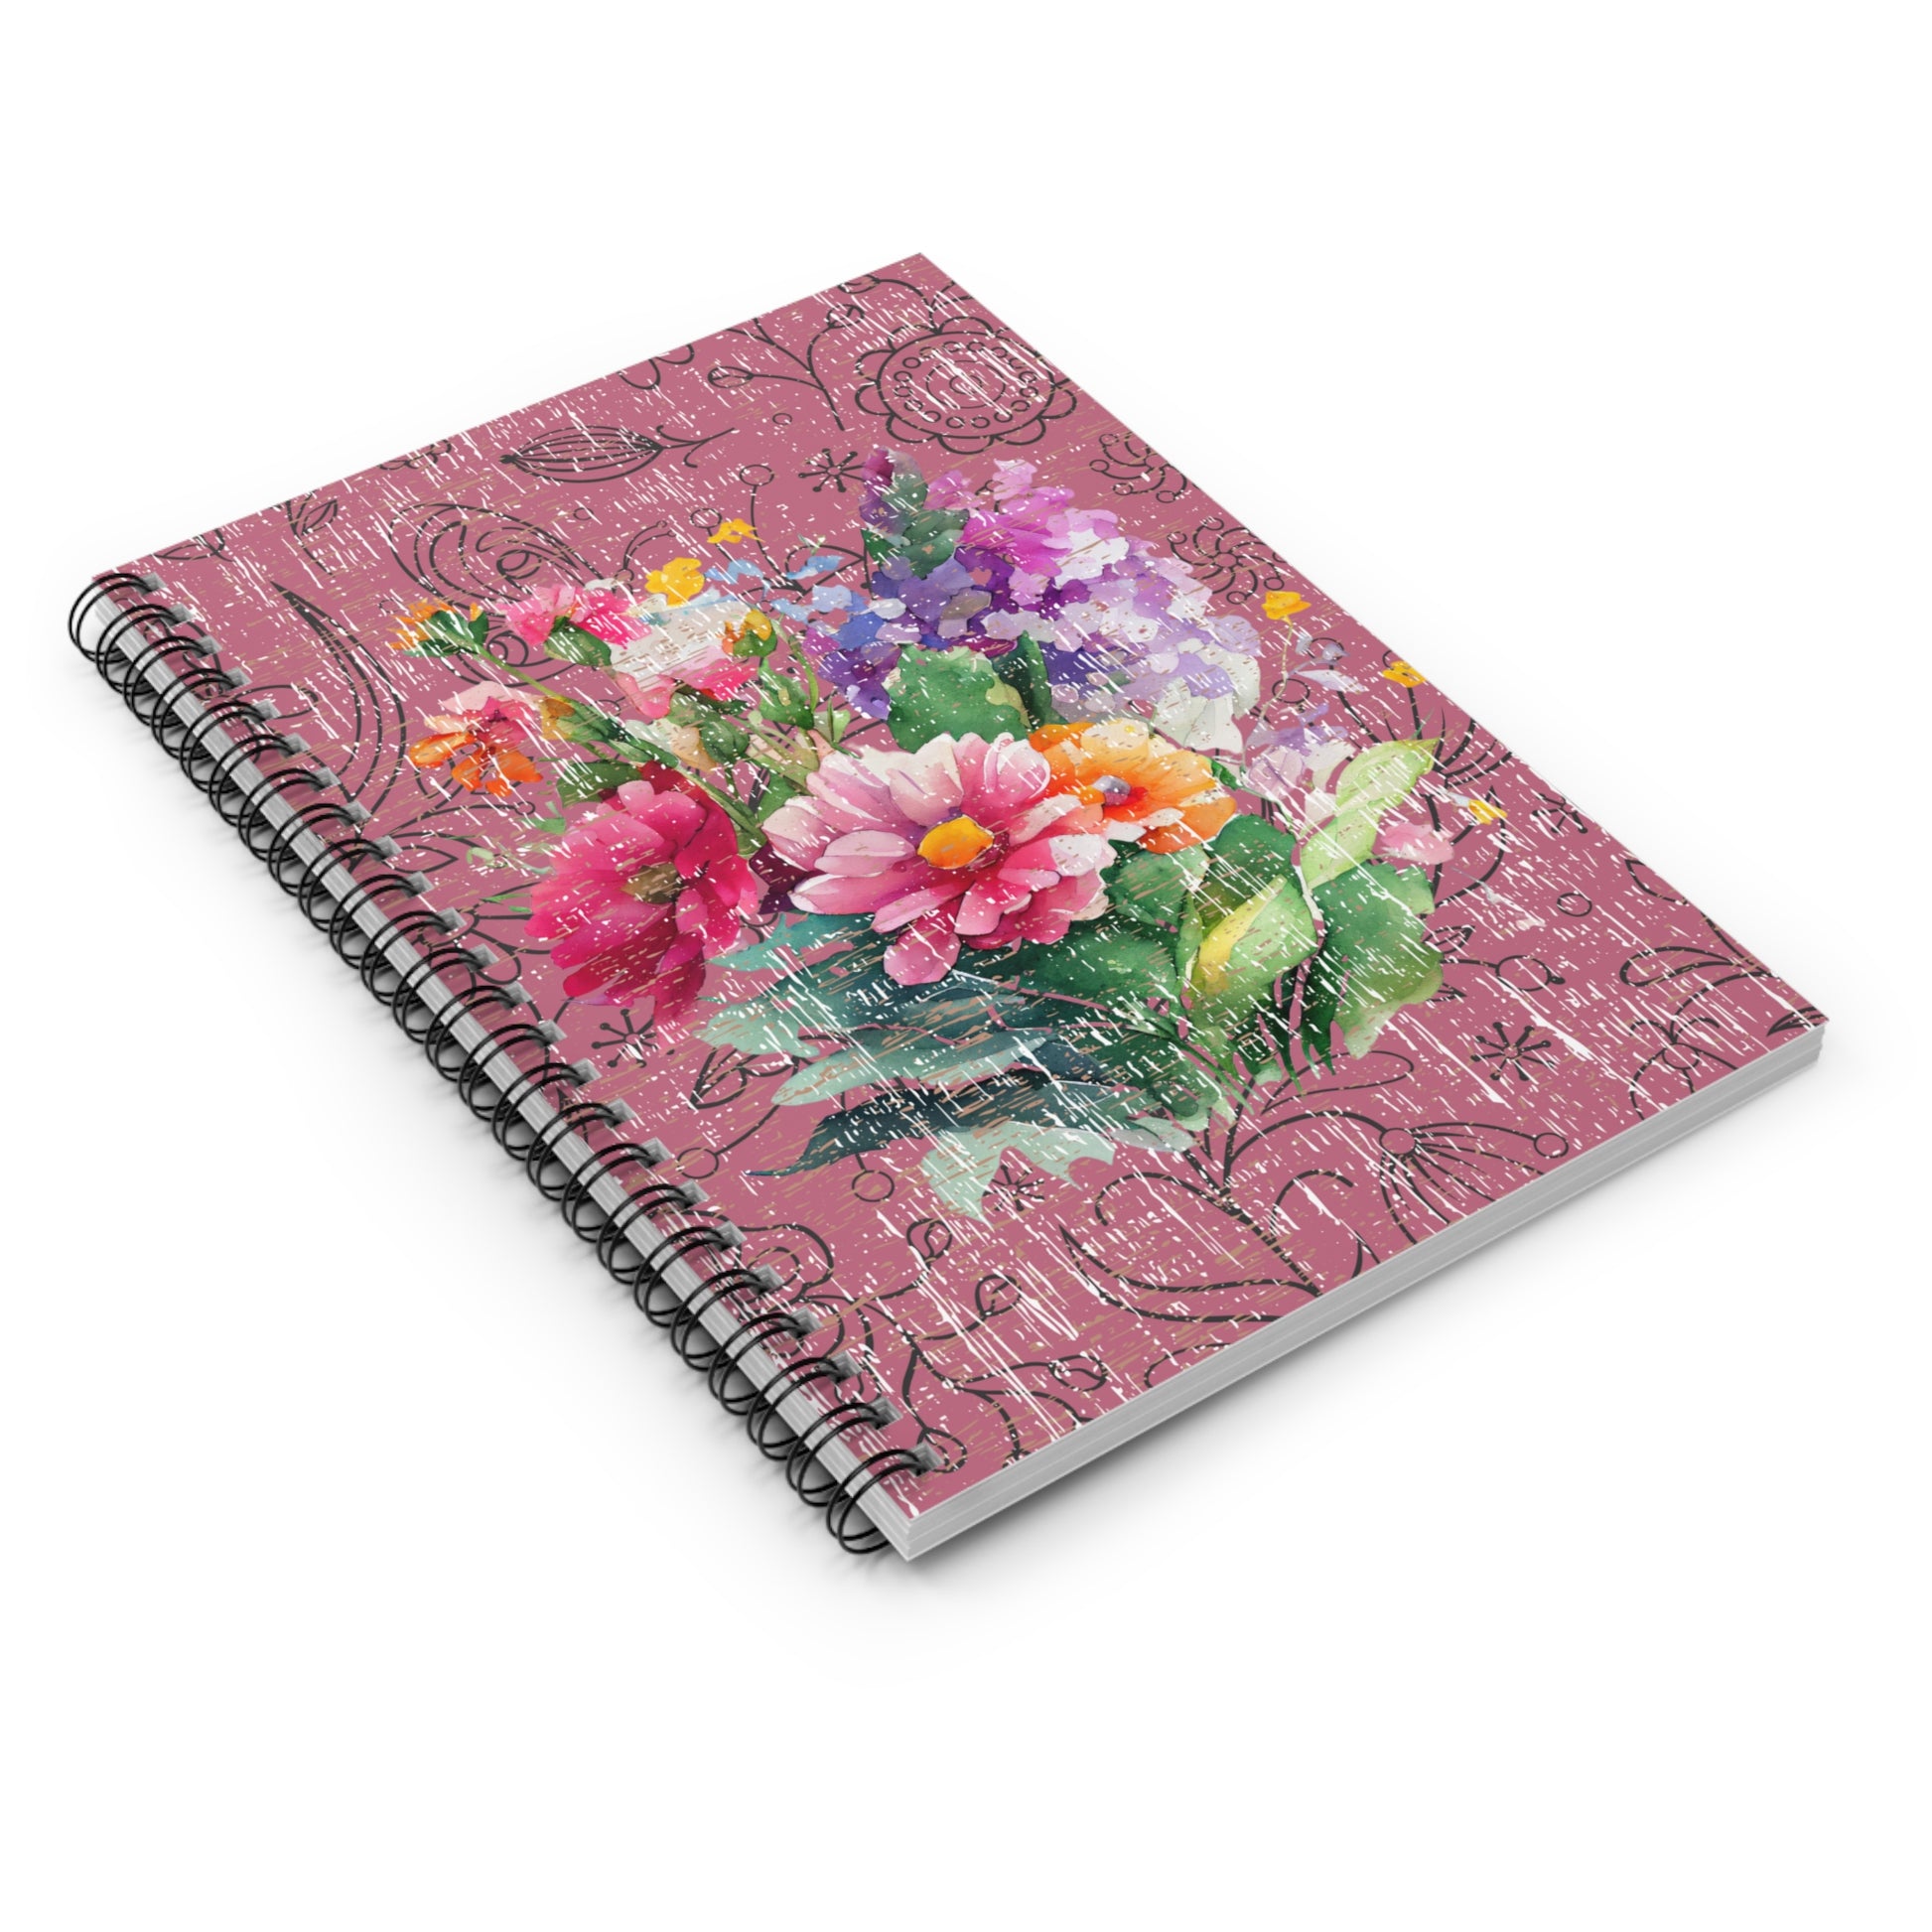 Rose-Colored Vintage Bliss: Floral Spiral Notebook for Elegant Writing and Creative InspirationRose-Colored Vintage Bliss: Floral Spiral Notebook for Elegant Writing and Creative Inspiration - Eddy and Rita